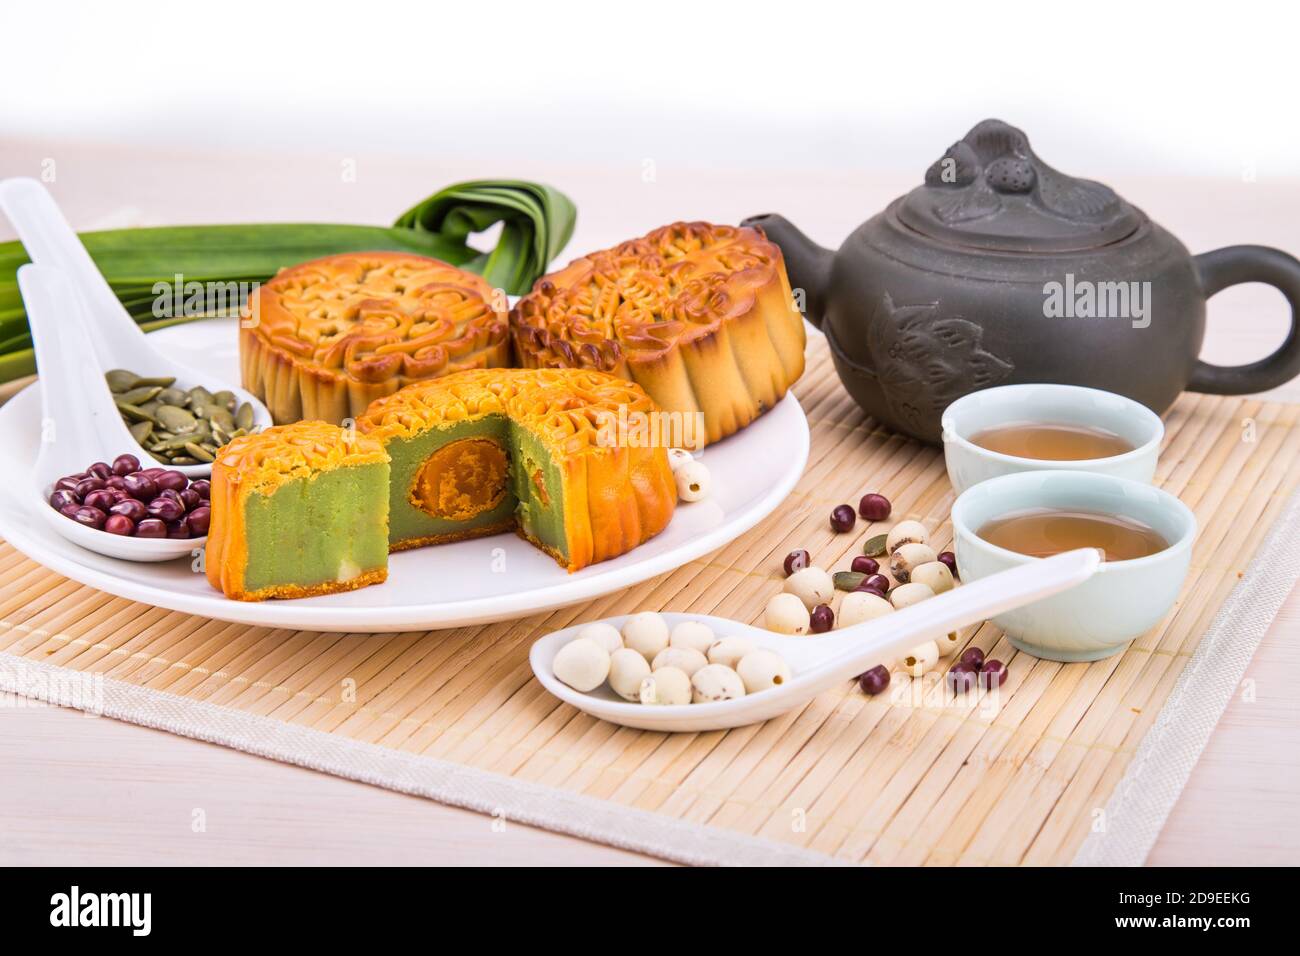 Mooncake for Chinese mid-autumn festival celebration, wih ingredients and tea. Stock Photo